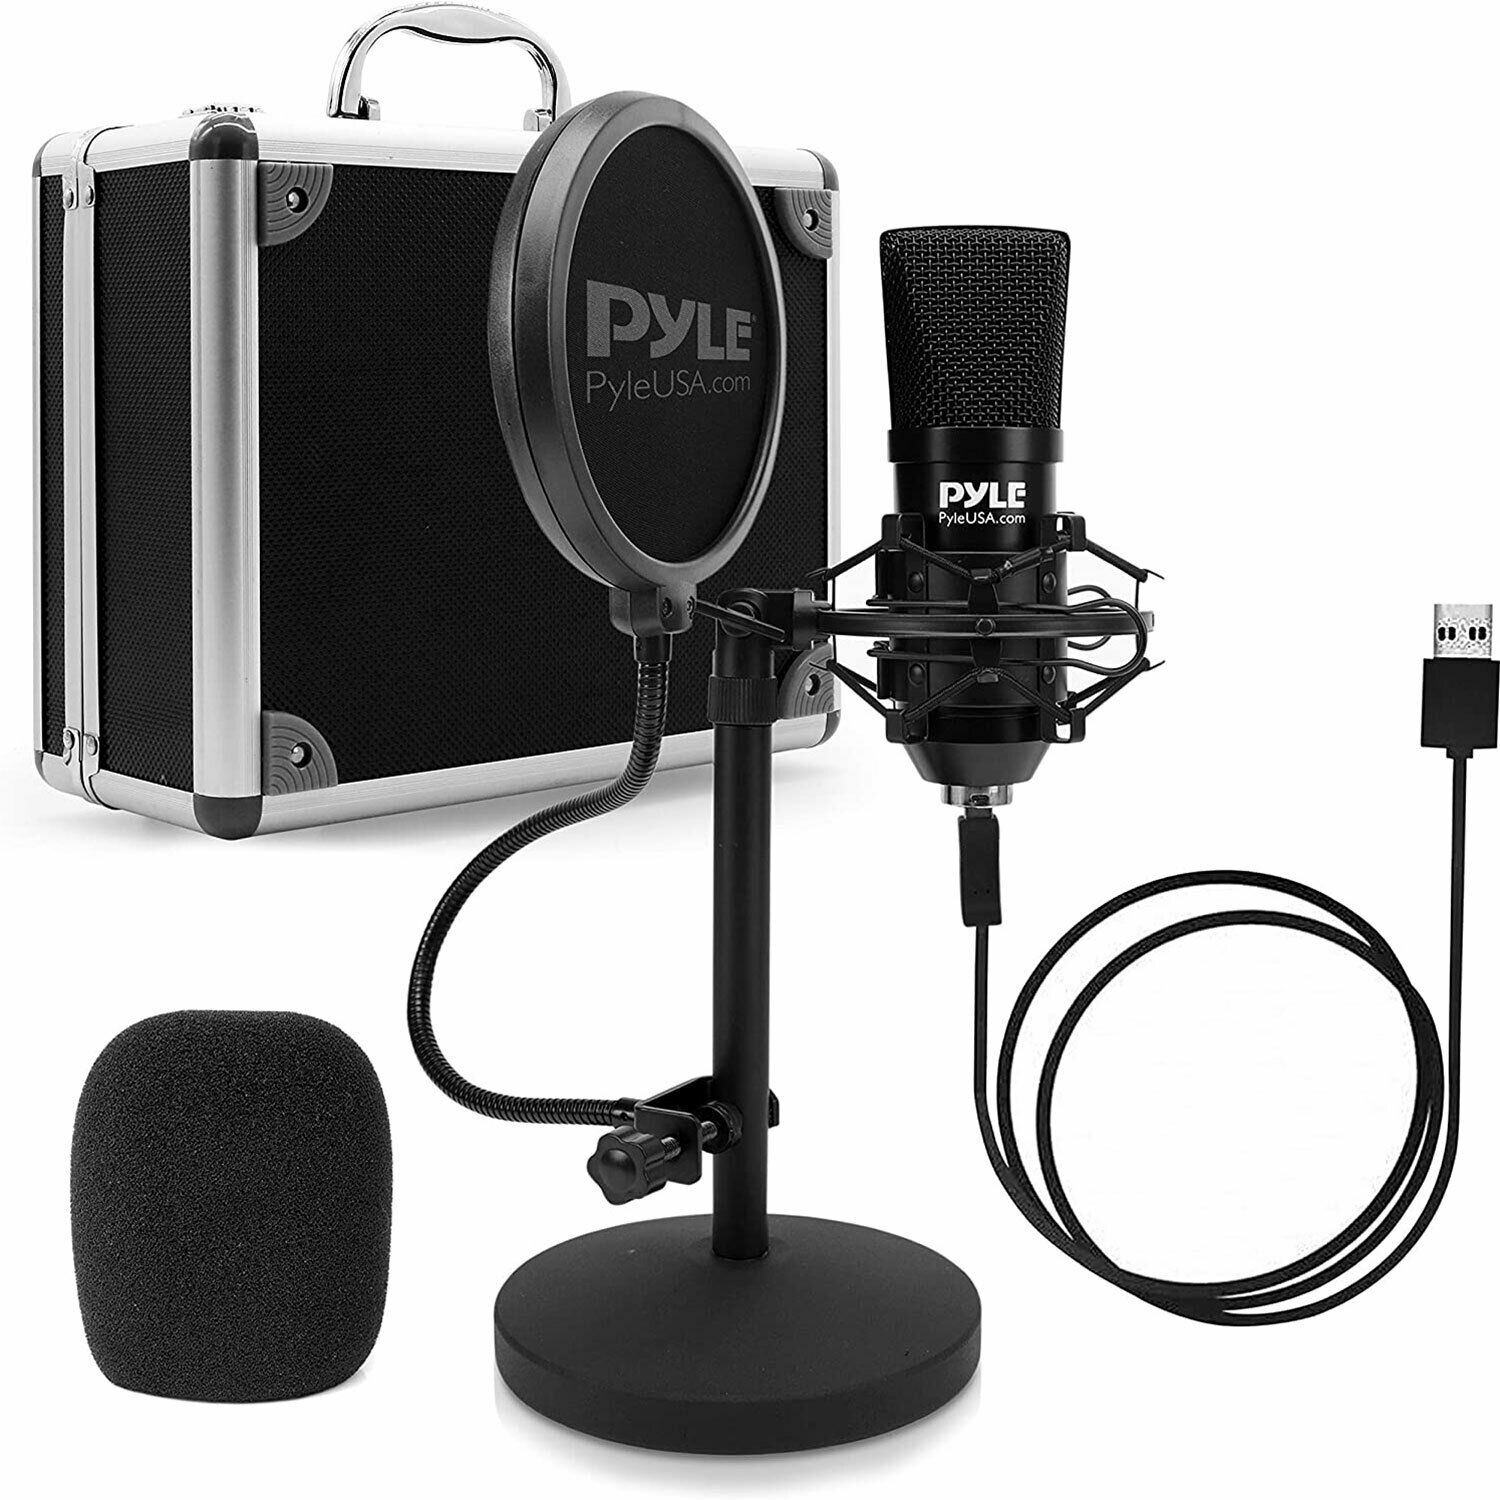 Pyle Pro Audio Recording Computer Microphone Kit With Travel Case (open Box)